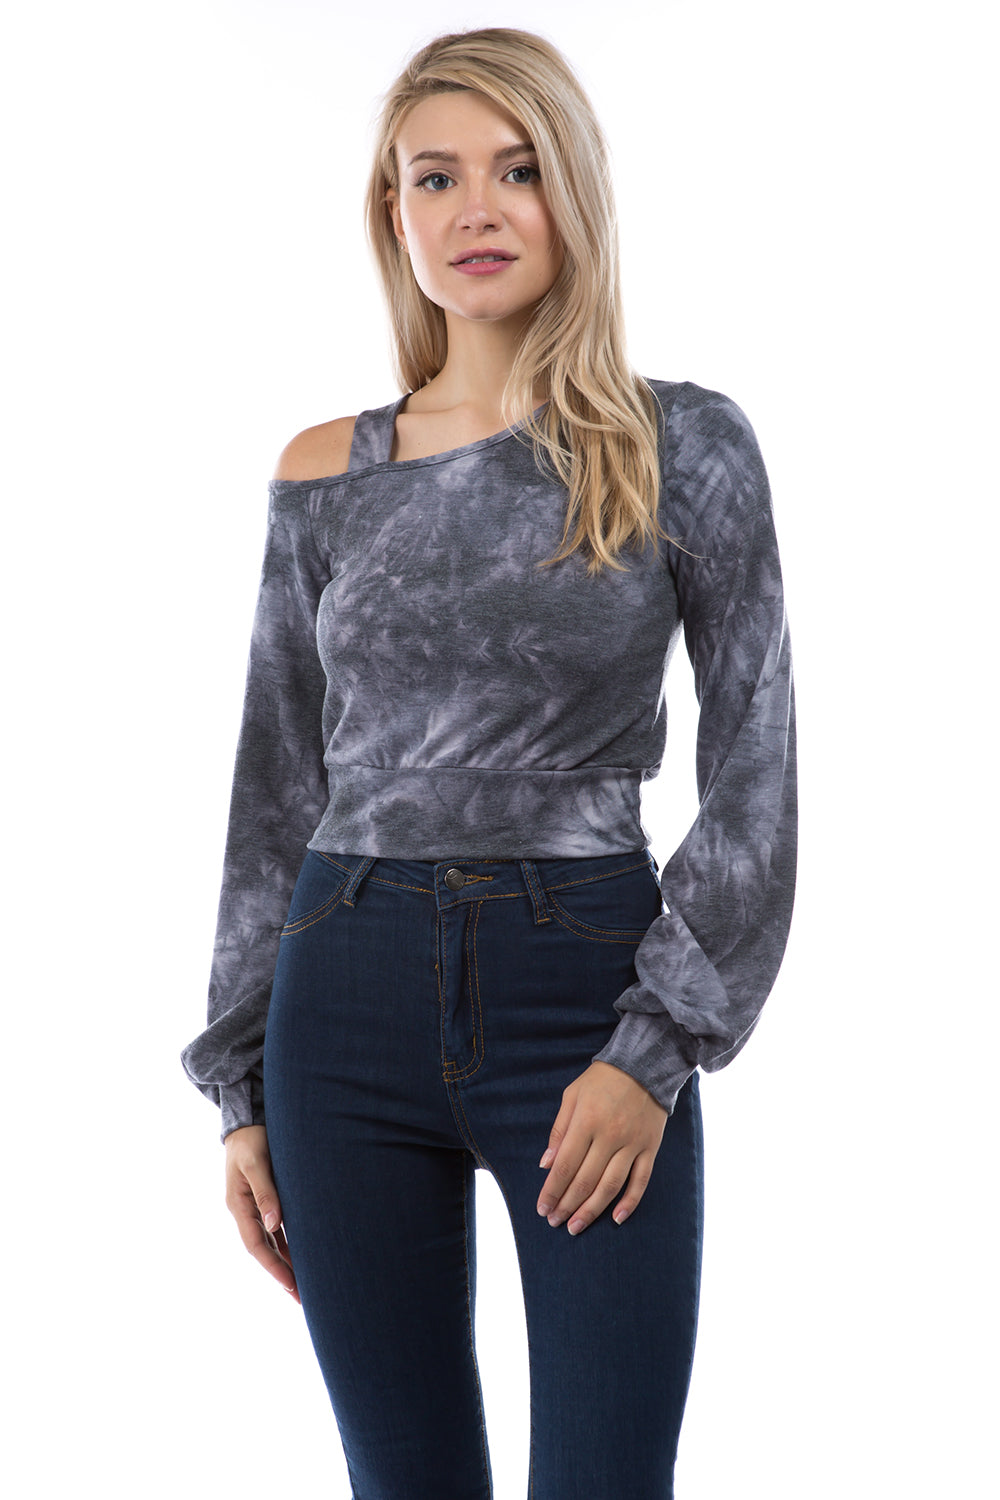 ELISE COLD SHOULDER CROP TOP (FRENCH TERRY CHARCOAL TIE DYE)-VT2841